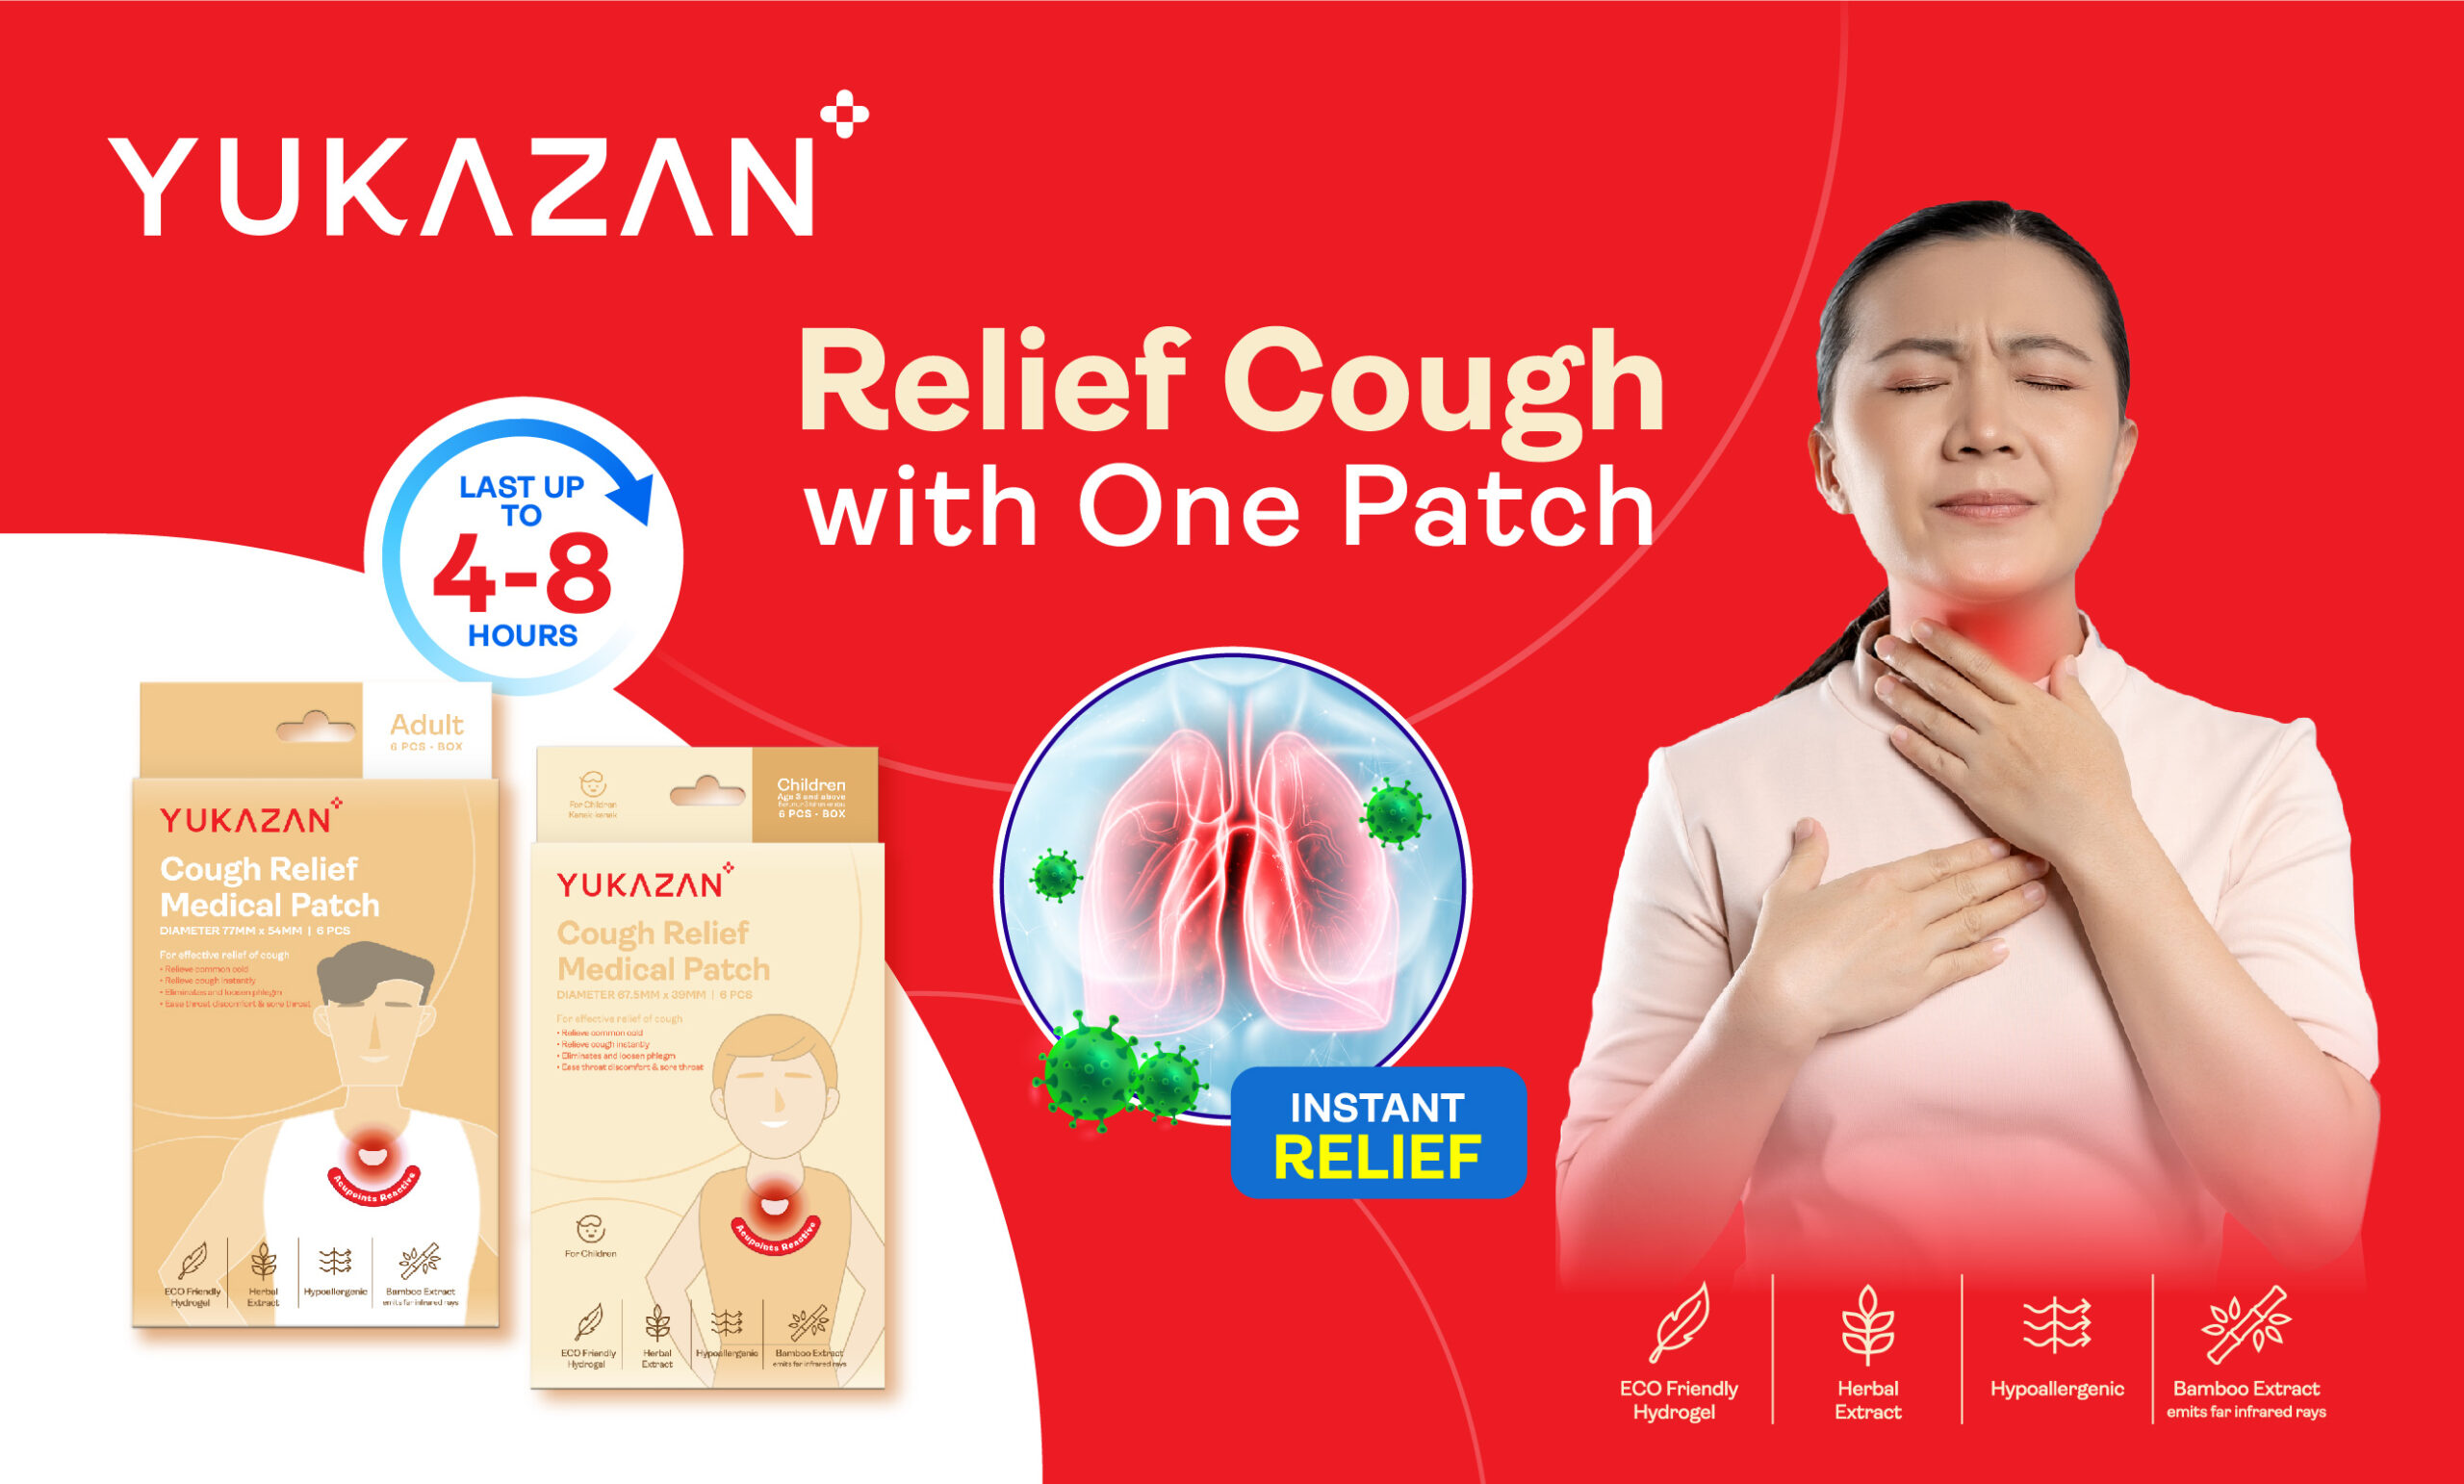 cough patch resize_750 x 452 2_750 x 452 2